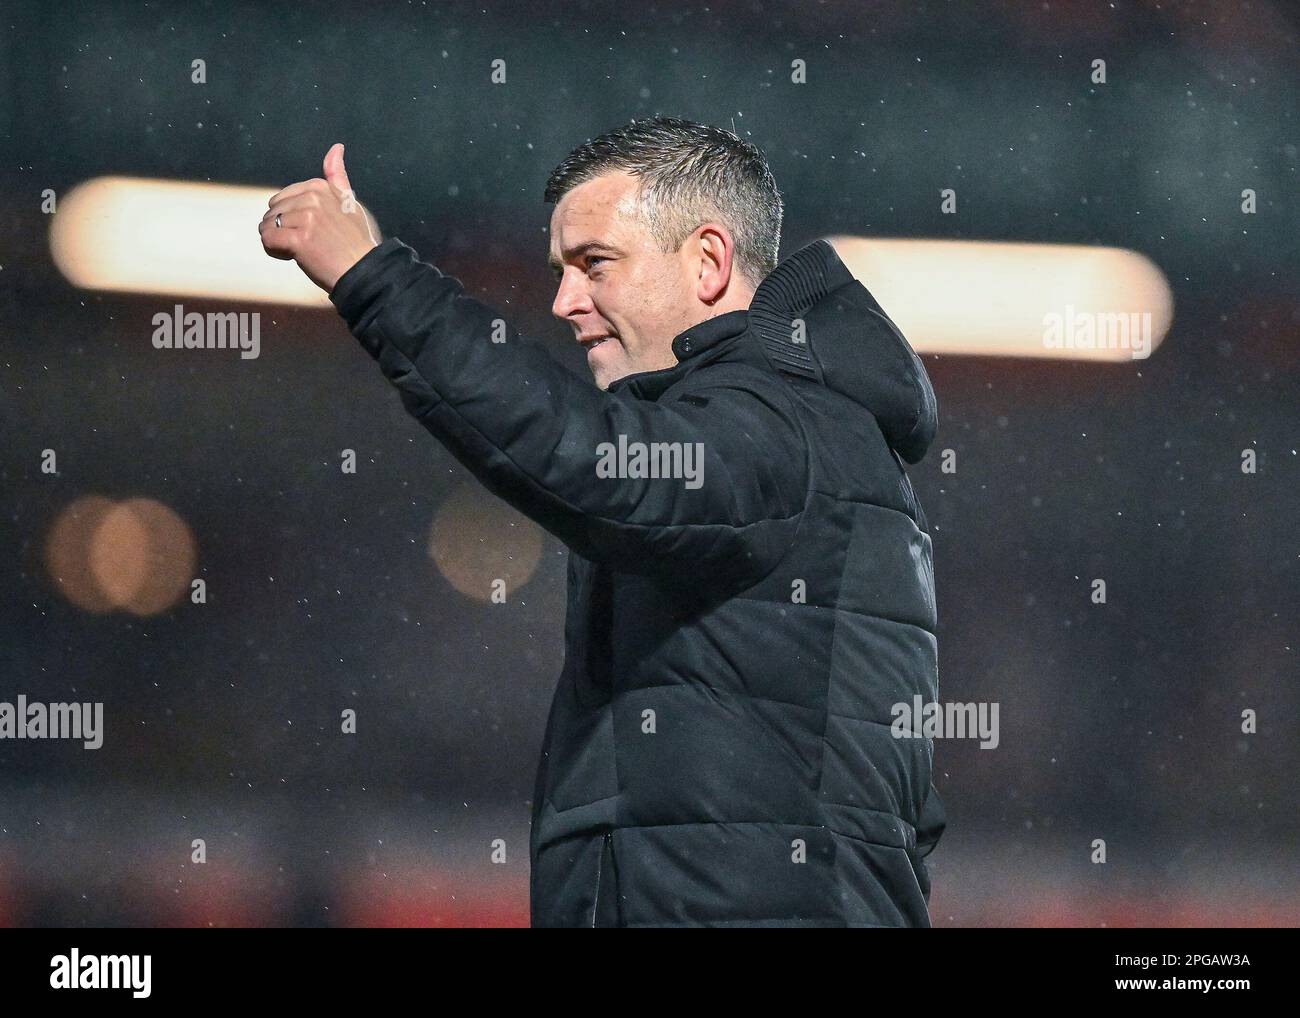 Plymouth Argyle Manager Steven Schumacher celebrates a win at full time and applauds the fans with thumb up during the Sky Bet League 1 match Accrington Stanley vs Plymouth Argyle at Wham Stadium, Accrington, United Kingdom, 21st March 2023  (Photo by Stan Kasala/News Images) Stock Photo